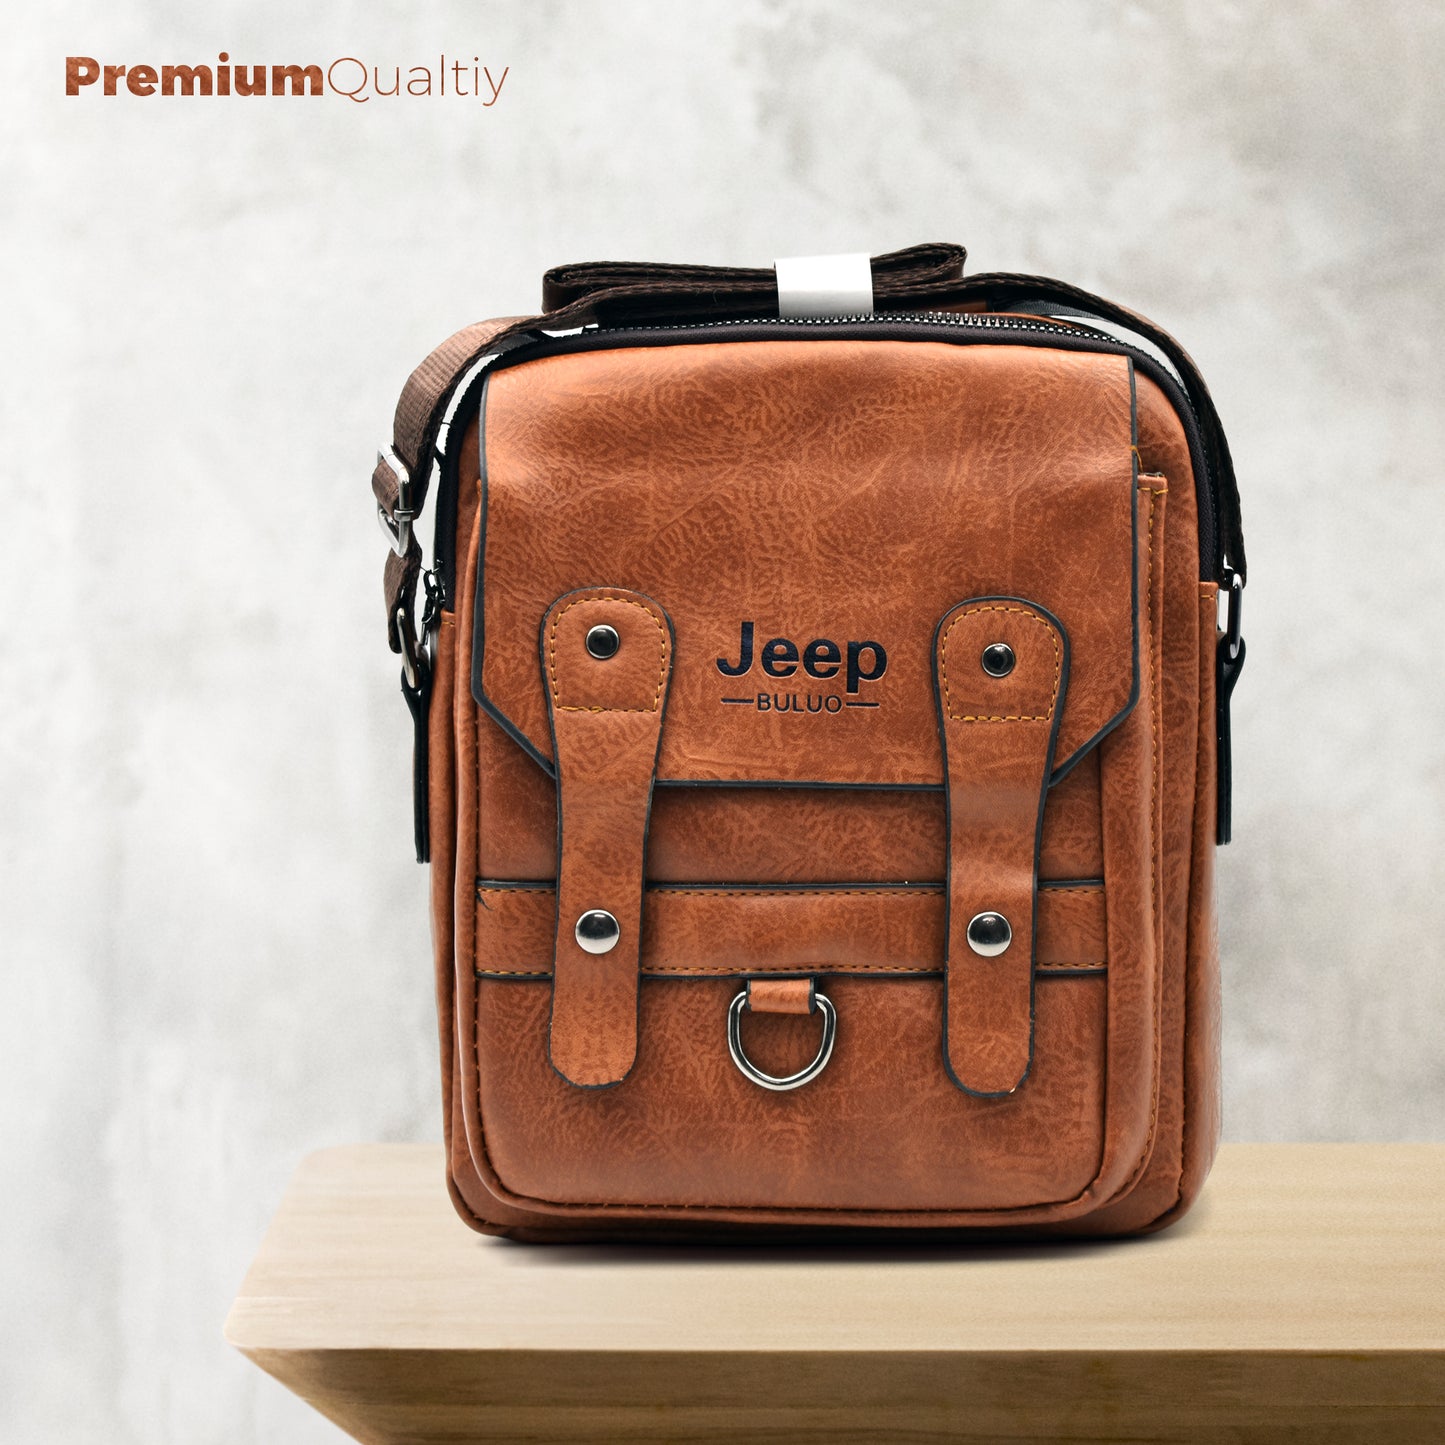 Premium Quality Messenger Bag - Imported from China - JP Side Bag 11